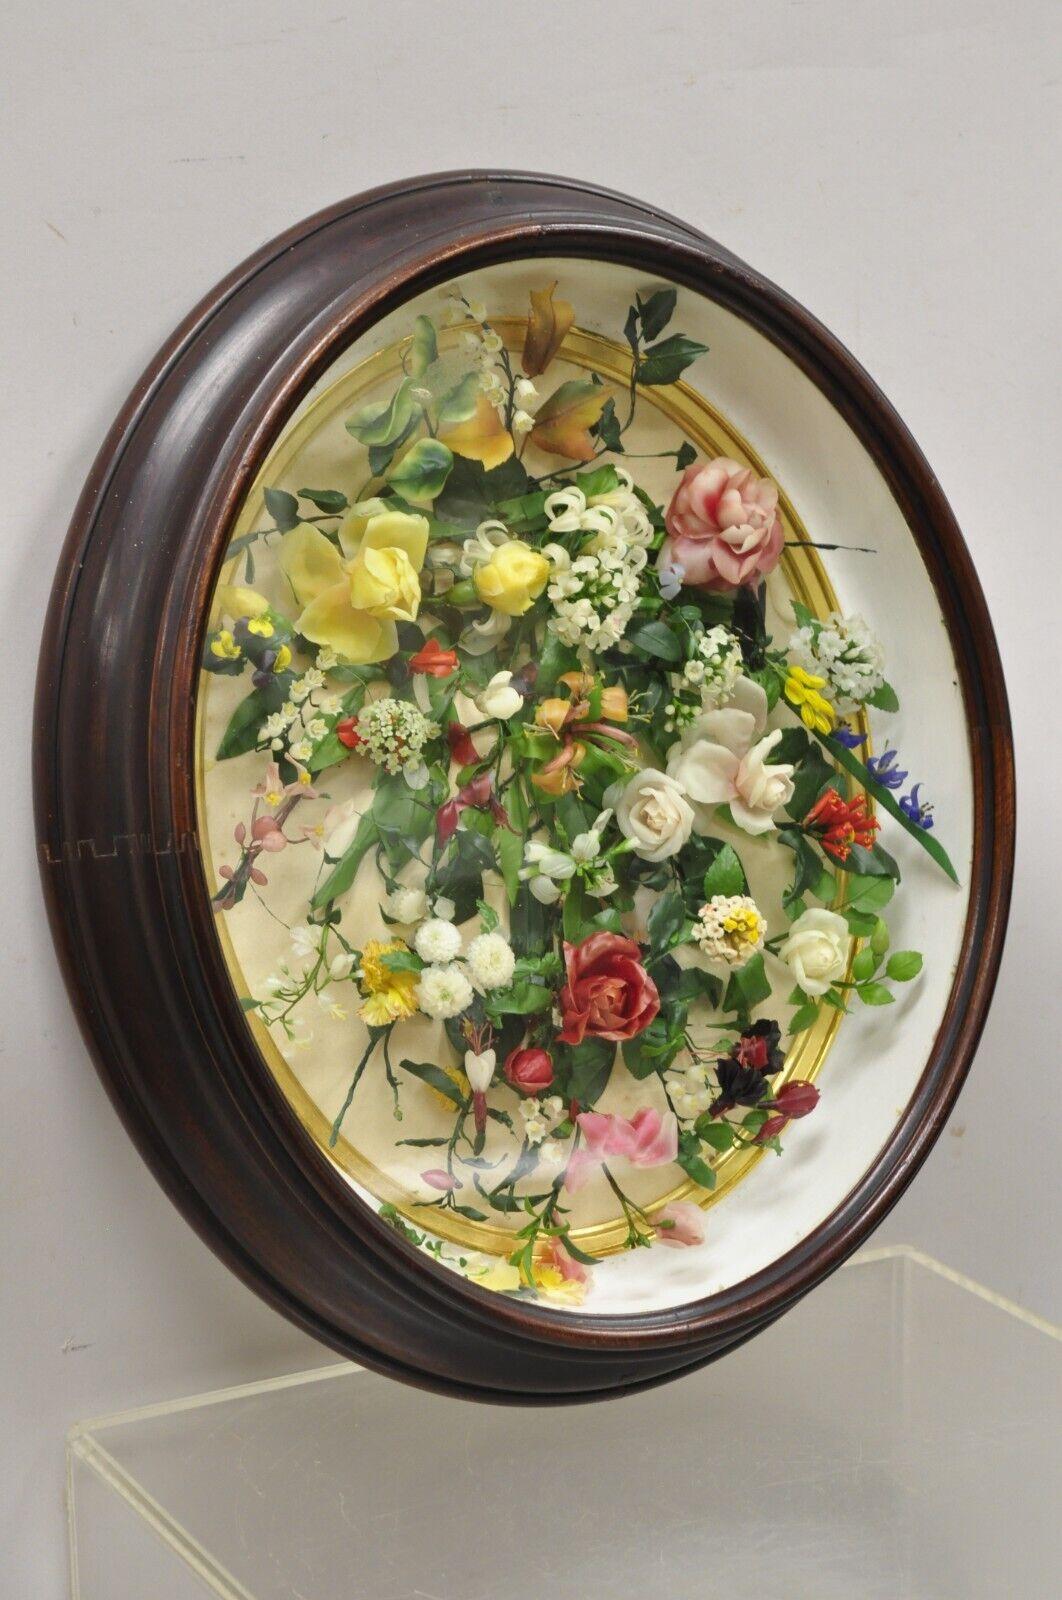 Antique Victorian Wax Floral Mourning Wreath Oval Mahogany Shadow Box Oddity. Colorful wax flower arrangement, oval mahogany shadowbox wood frame, gold gilt interior trim, glass front, very nice antique item. Circa 19th Century. Measurements: 19.5